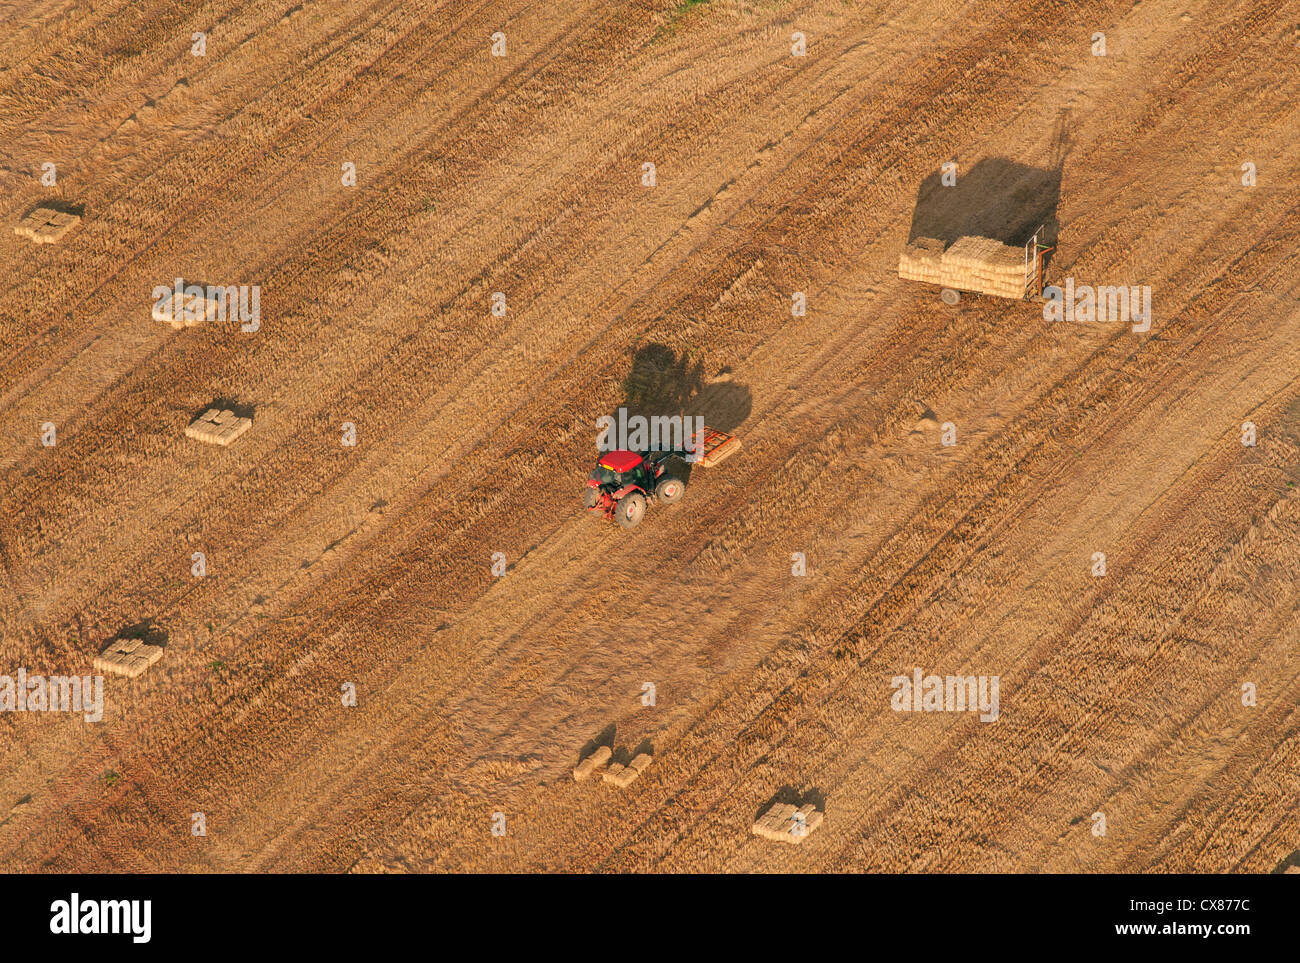 Aerial view of tractor collecting hay bales Stock Photo